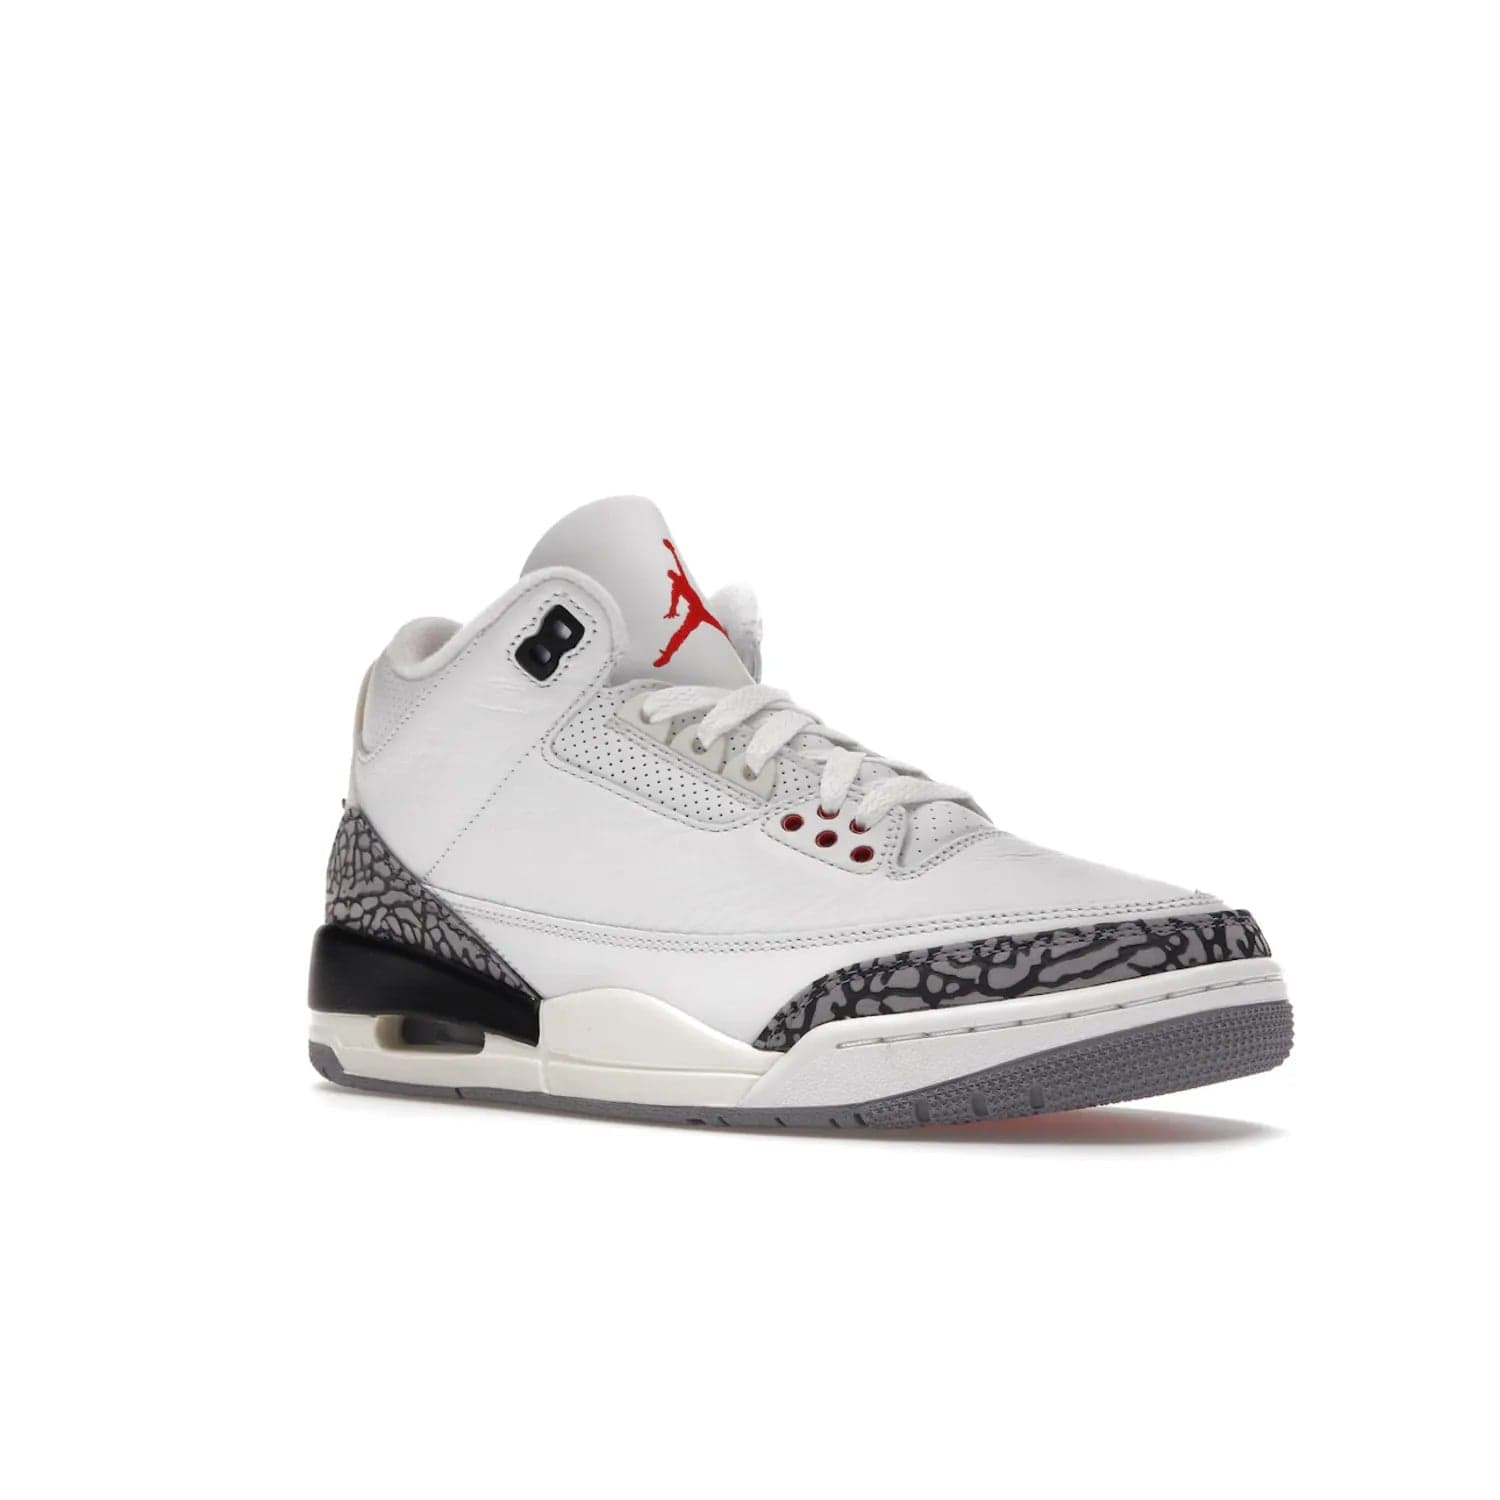 Jordan 3 Retro White Cement Reimagined - Image 5 - Only at www.BallersClubKickz.com - The Reimagined Air Jordan 3 Retro in a Summit White/Fire Red/Black/Cement Grey colorway is launching on March 11, 2023. Featuring a white leather upper, off-white midsoles and heel tabs, this vintage-look sneaker is a must-have.